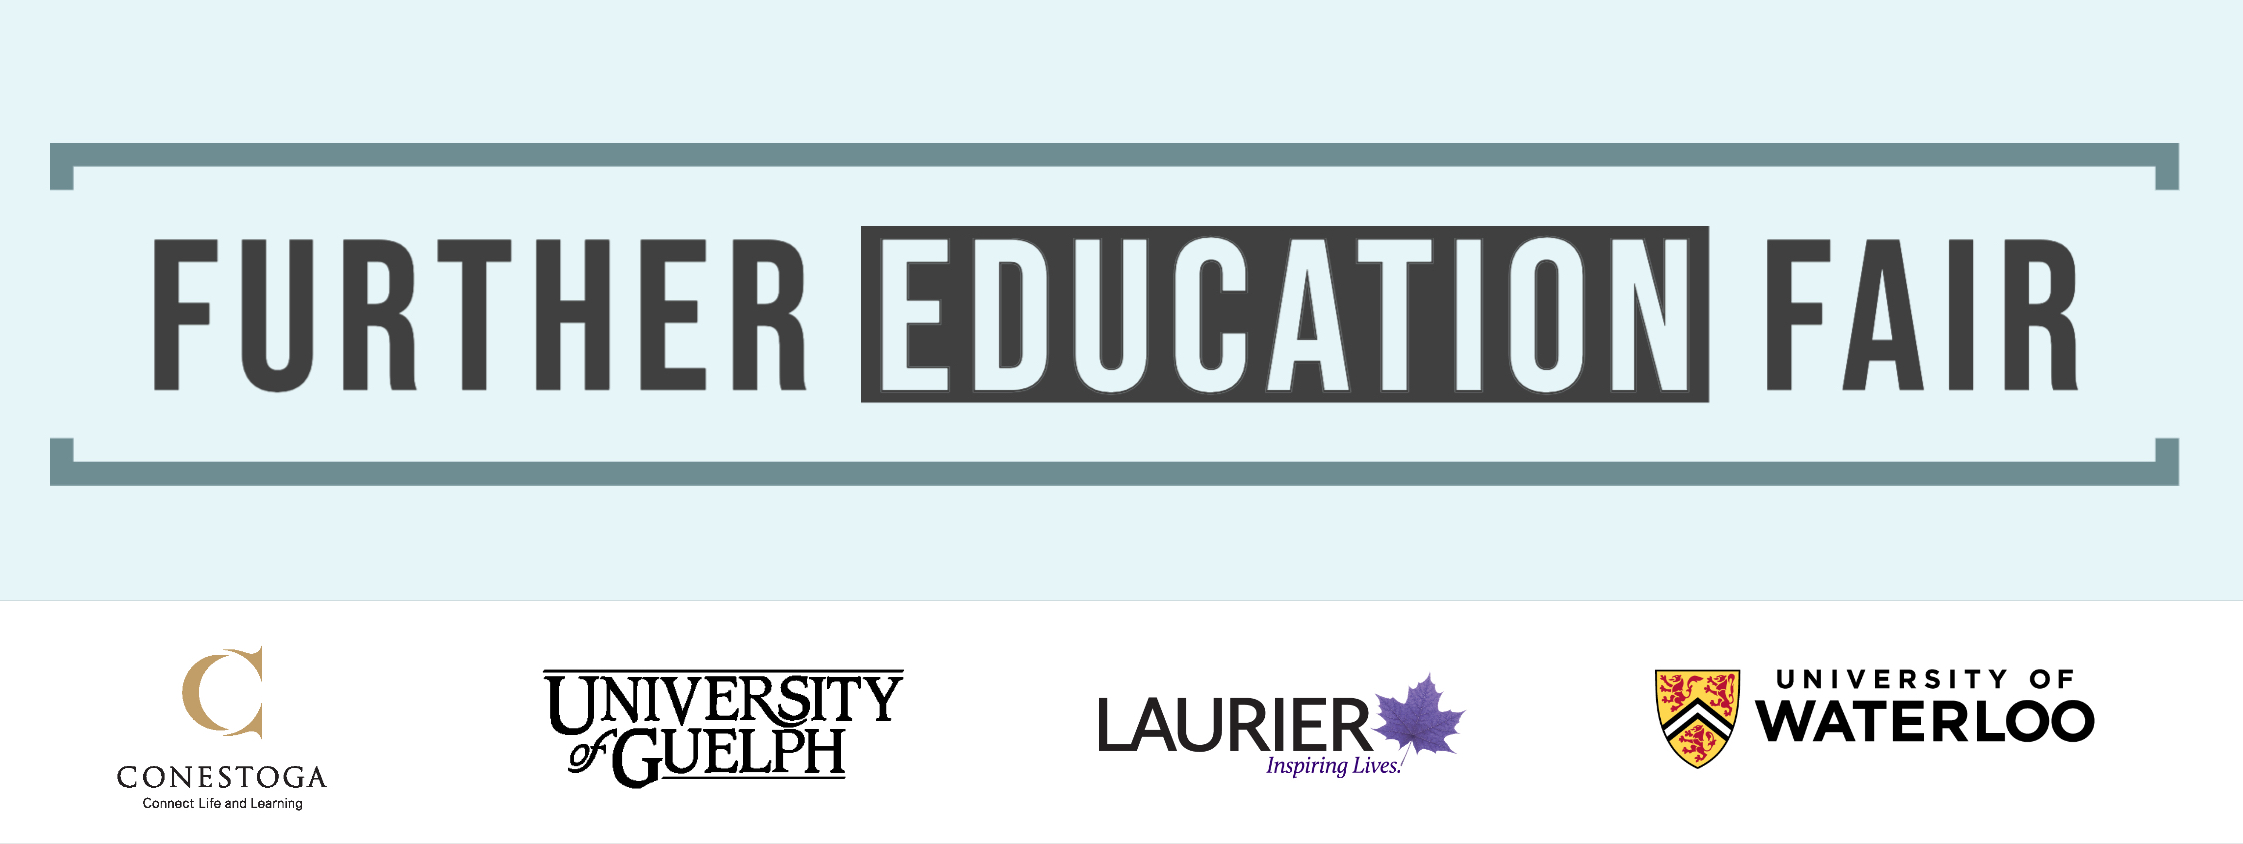 Further Education Fair - Guelph, Laurier, Waterloo, Conestoga